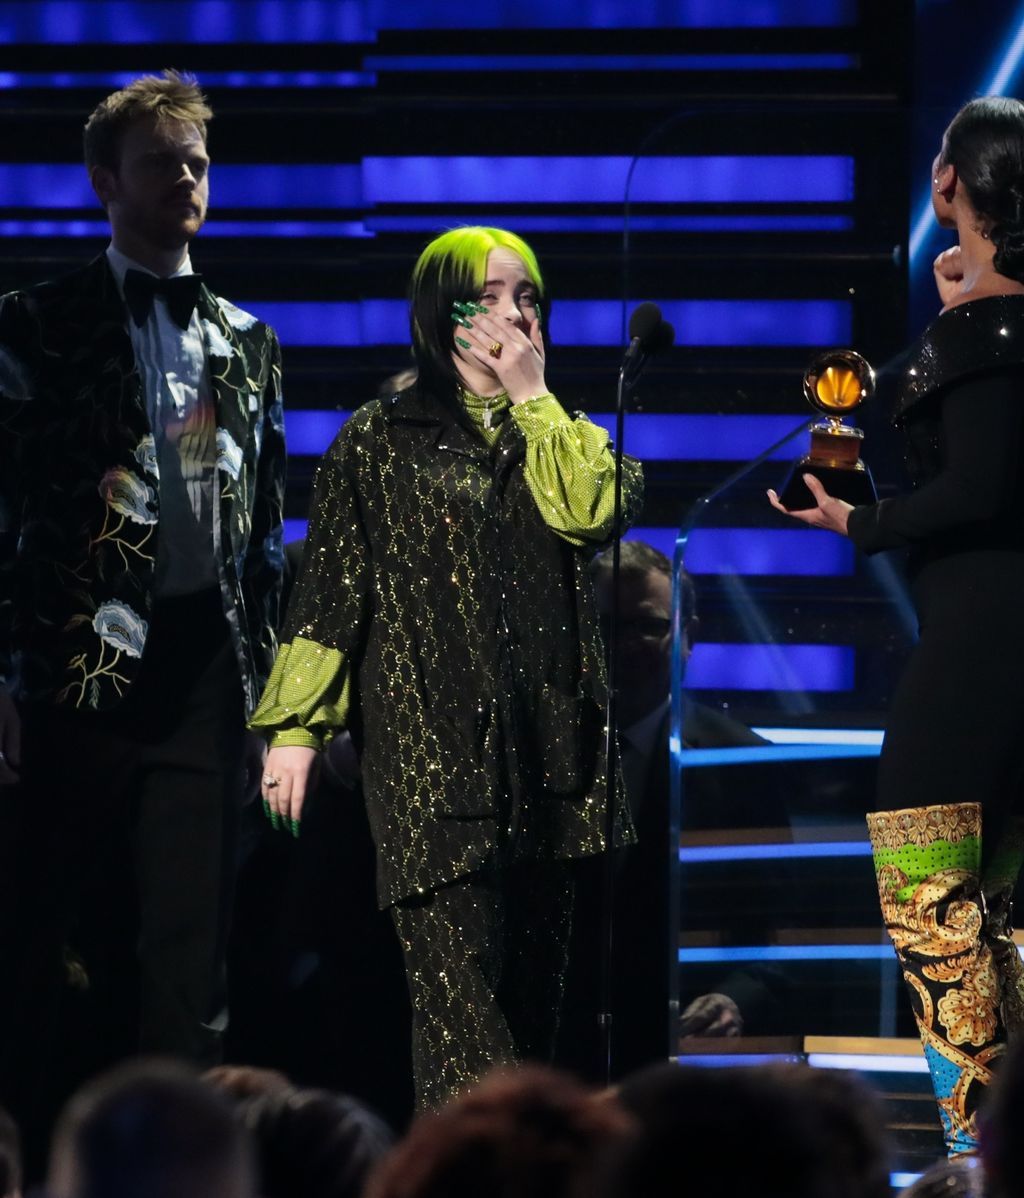 EuropaPress_2615006_January_26_2020_-_Los_Angeles_California_United_States__Billie_Eilish_and_Finneas_O'Connell_accept_the_Grammy_award_for_Album_of_the_Year_from_Alicia_Keys_at_the_62nd_GRAMMY_Awards_at_STAPLES